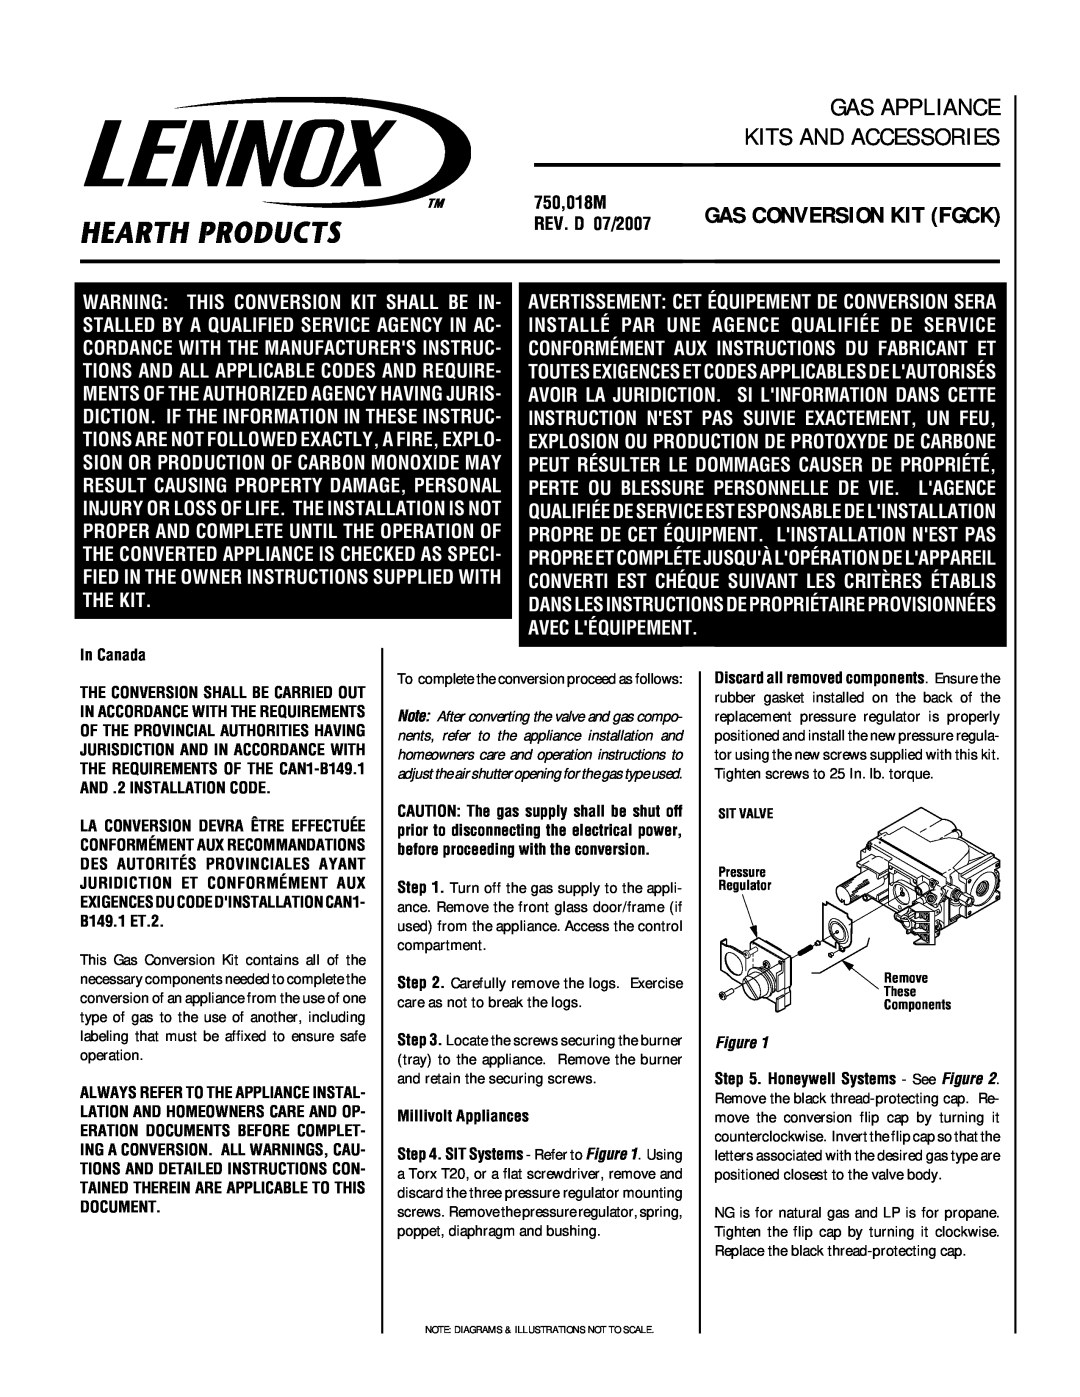 Lennox Hearth FGCK manual In Canada, AND .2 INSTALLATION CODE, Millivolt Appliances, Gas Conversion Kit Fgck 